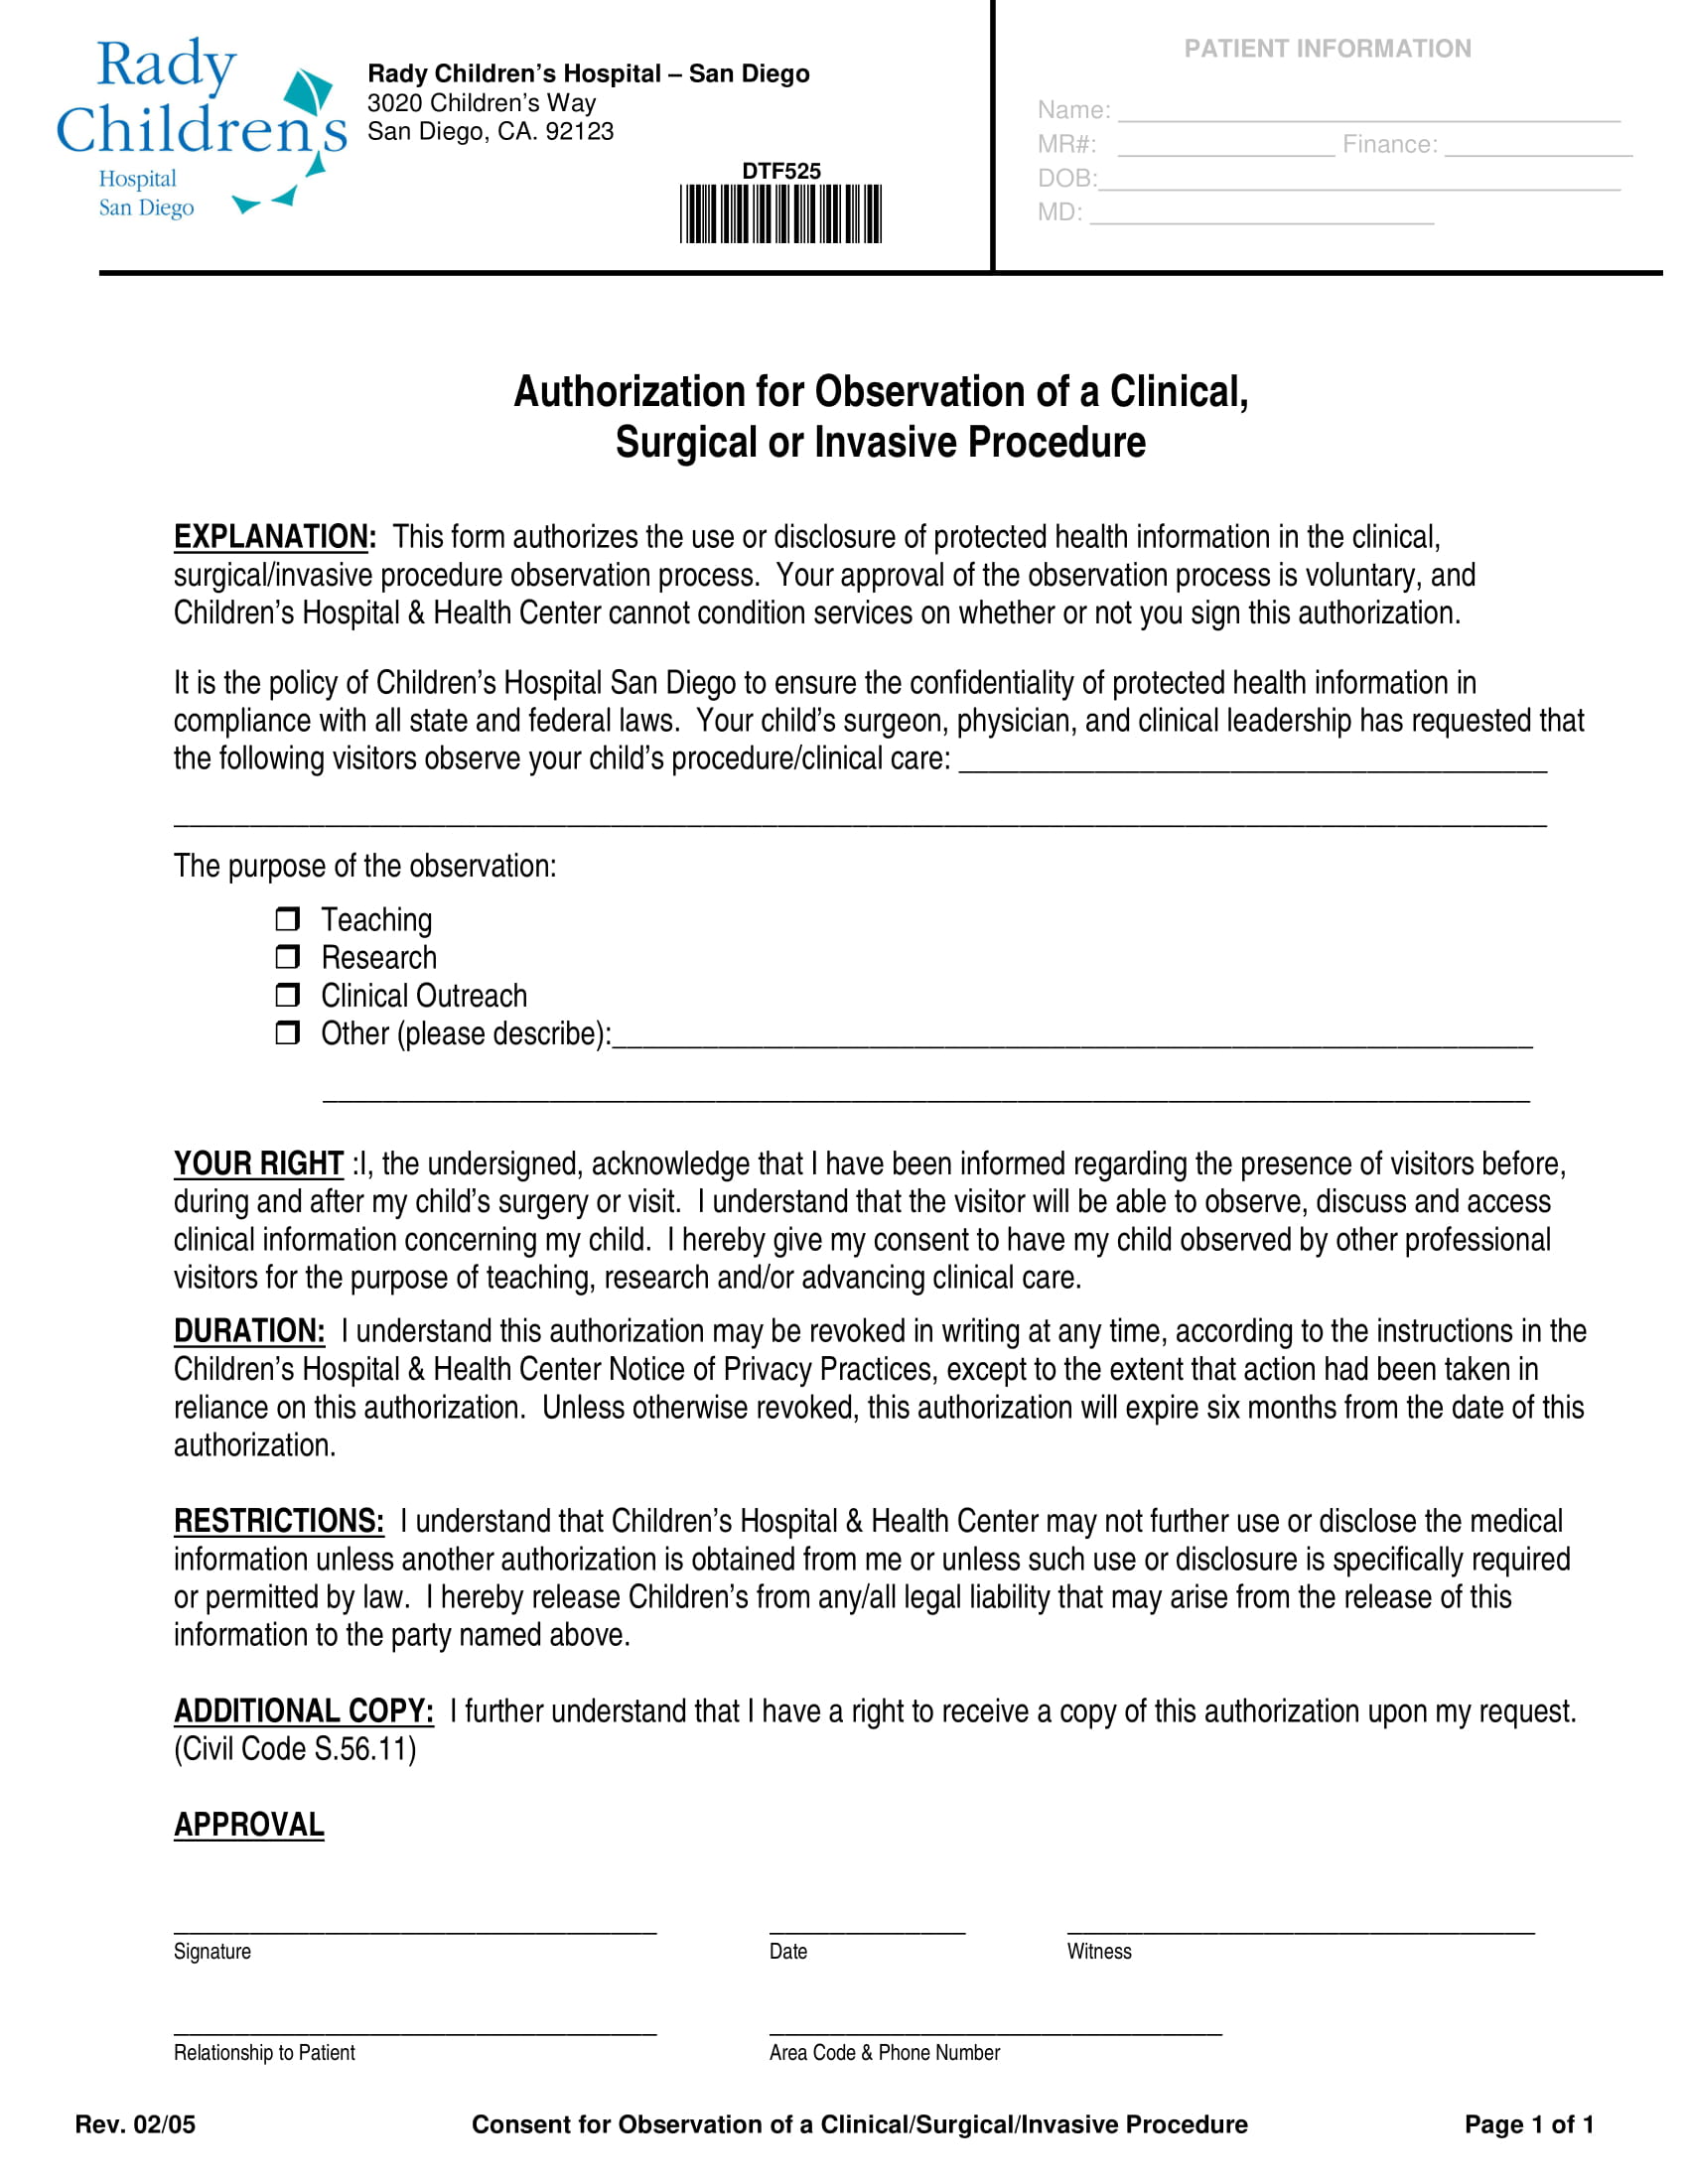 clinical procedure observation authorization form 1